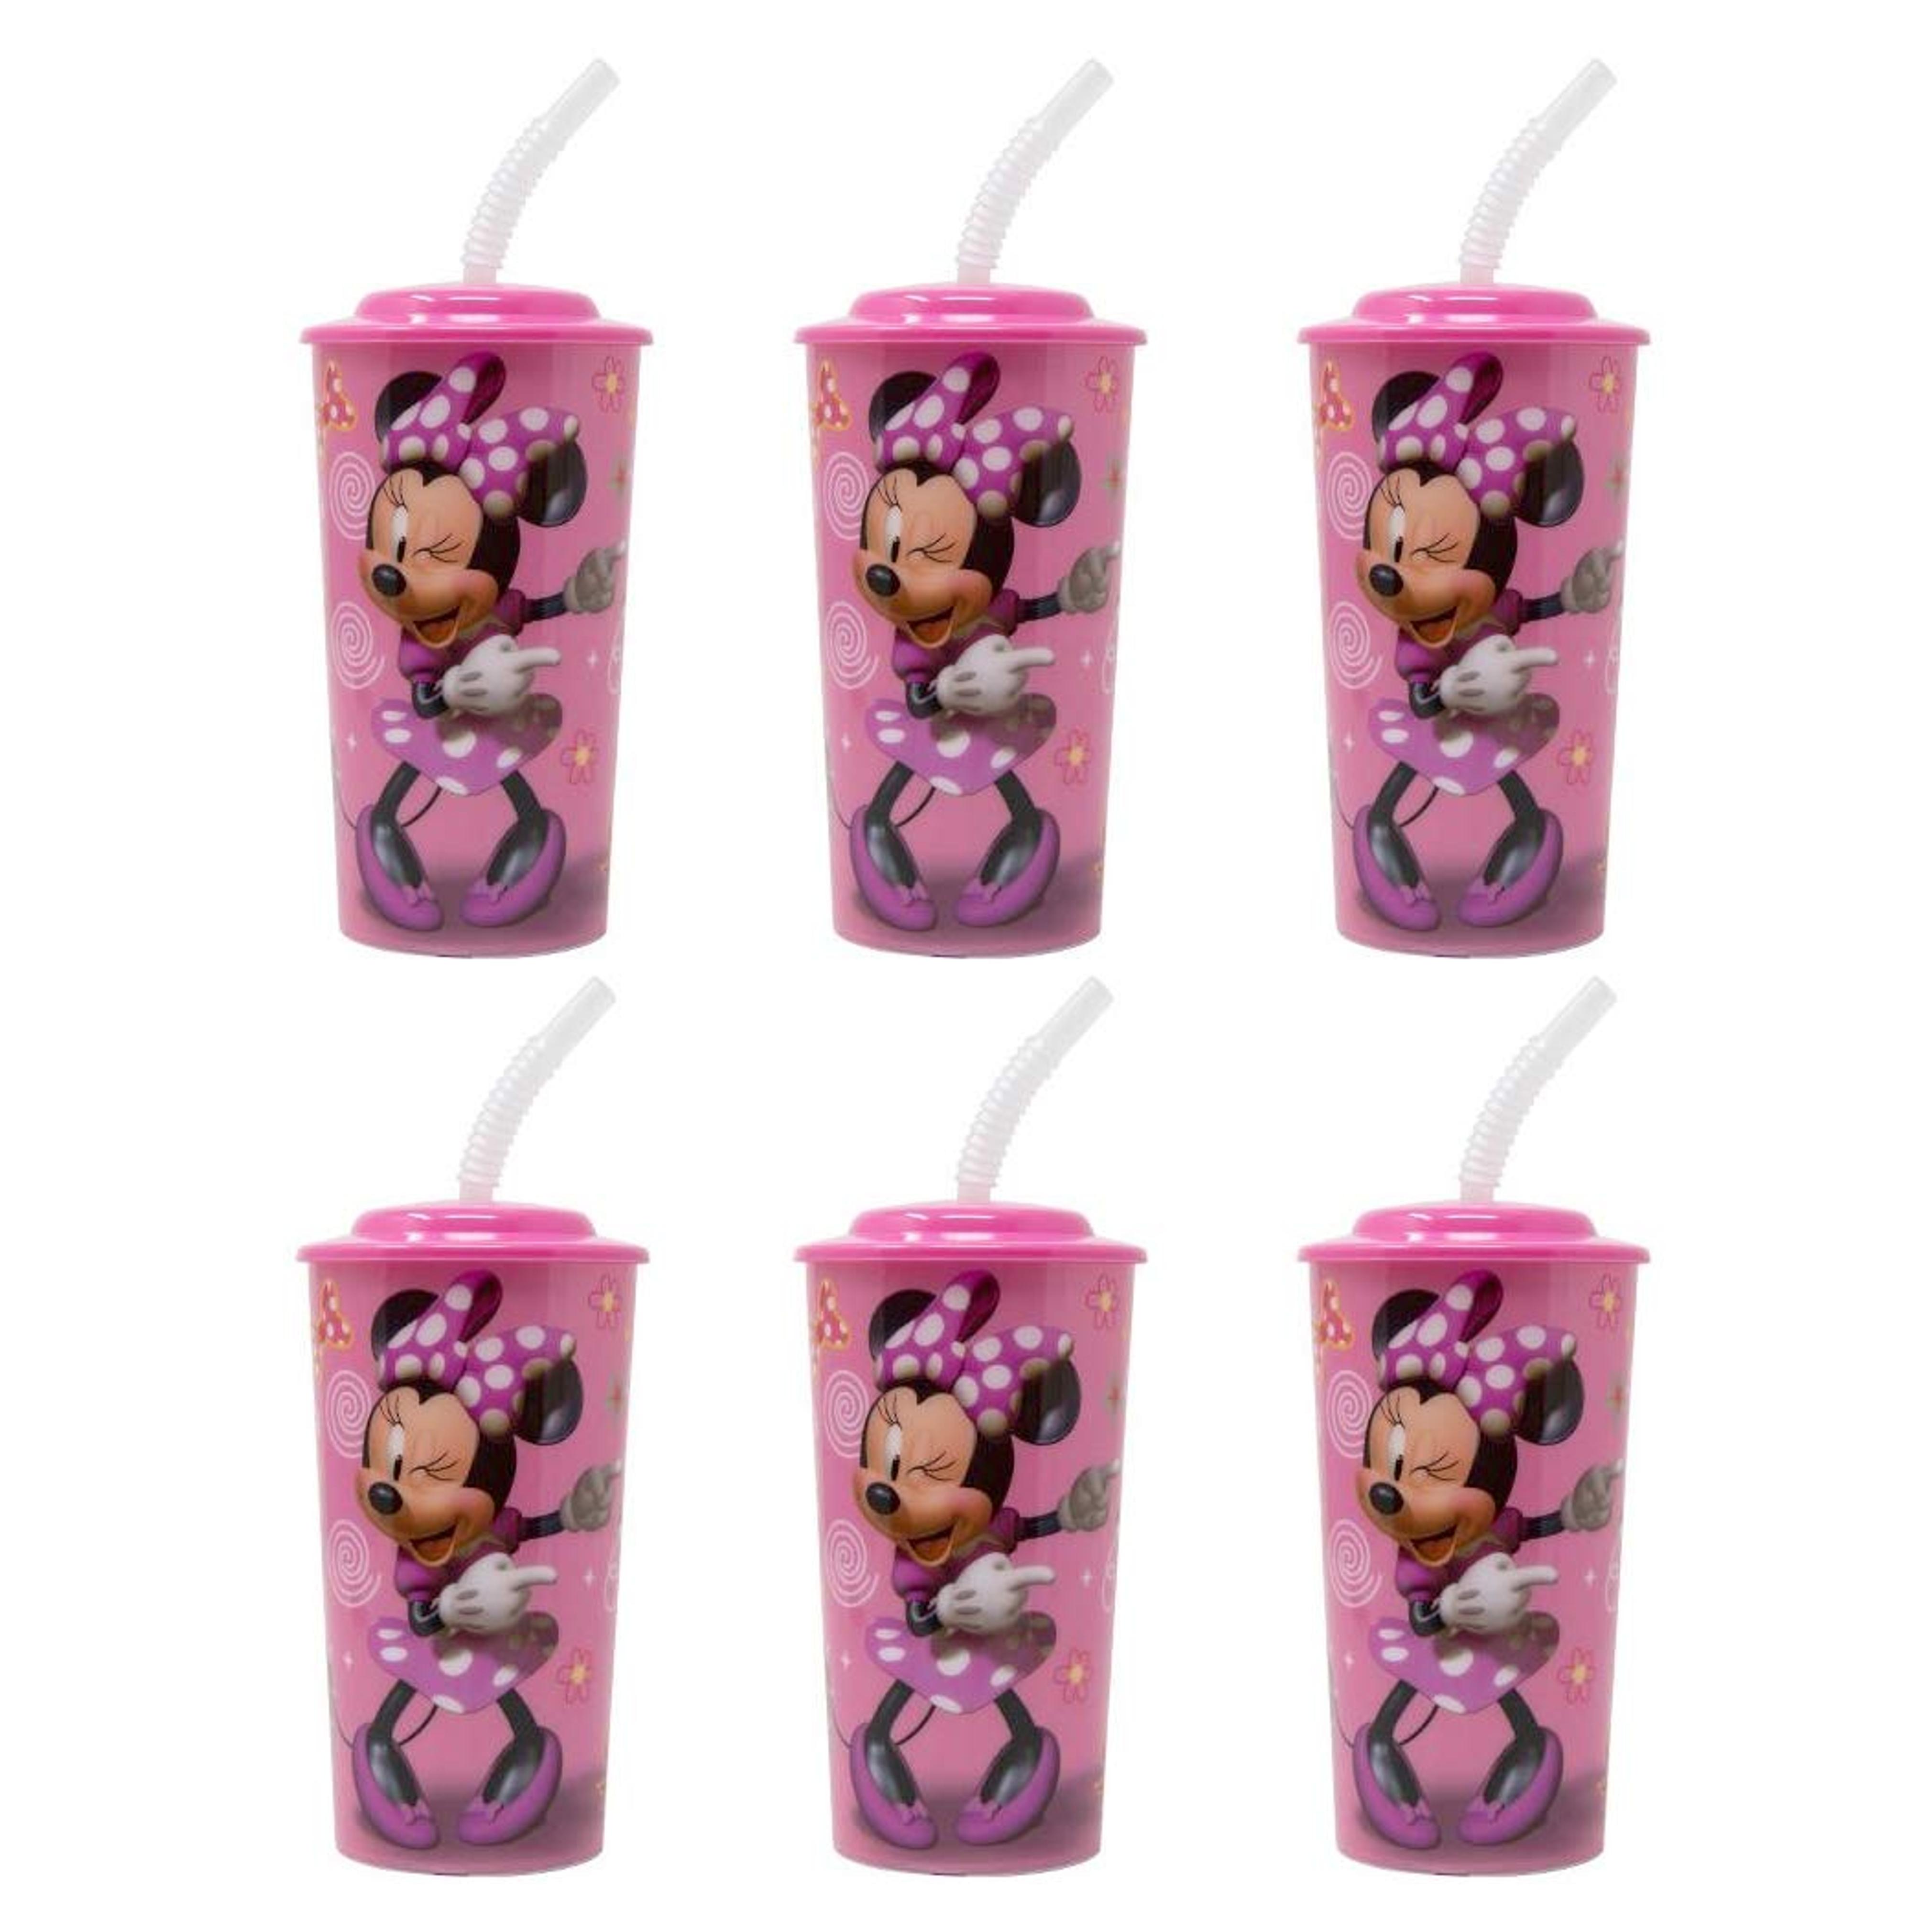 6-Pack Disney Minnie Mouse 16oz Reusable Sports Tumbler Drink Cups with Lids & Straws, Pink